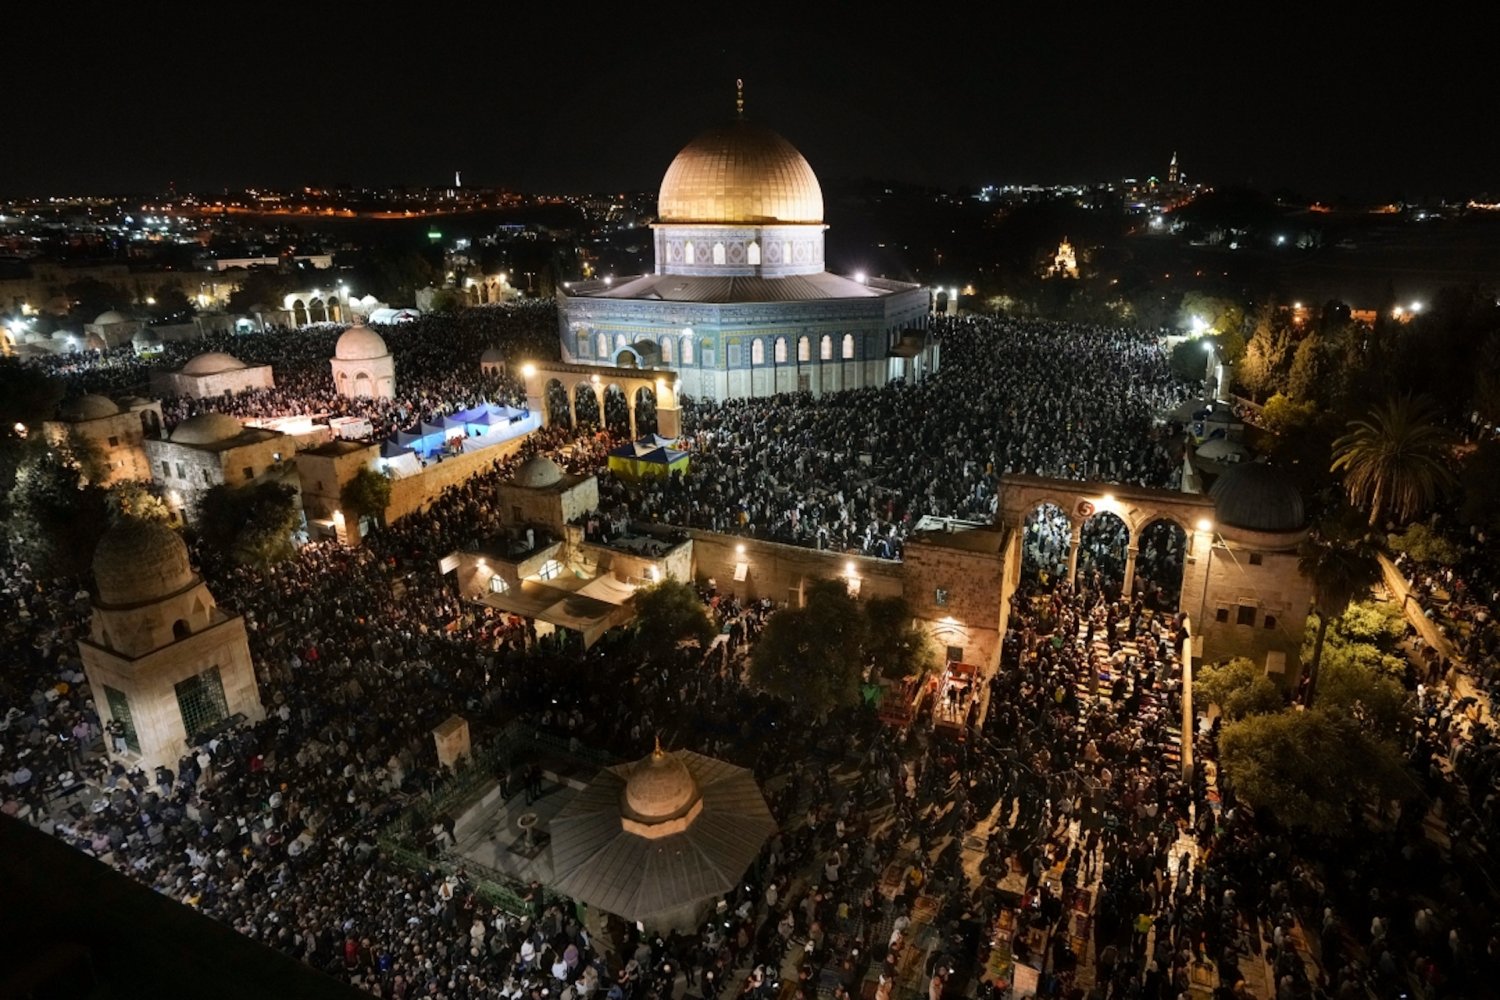 Worshippers pray at the al-Aqsa Mosque compound on Laylat al-Qadr (the Night of Power) during Ramadan 2022